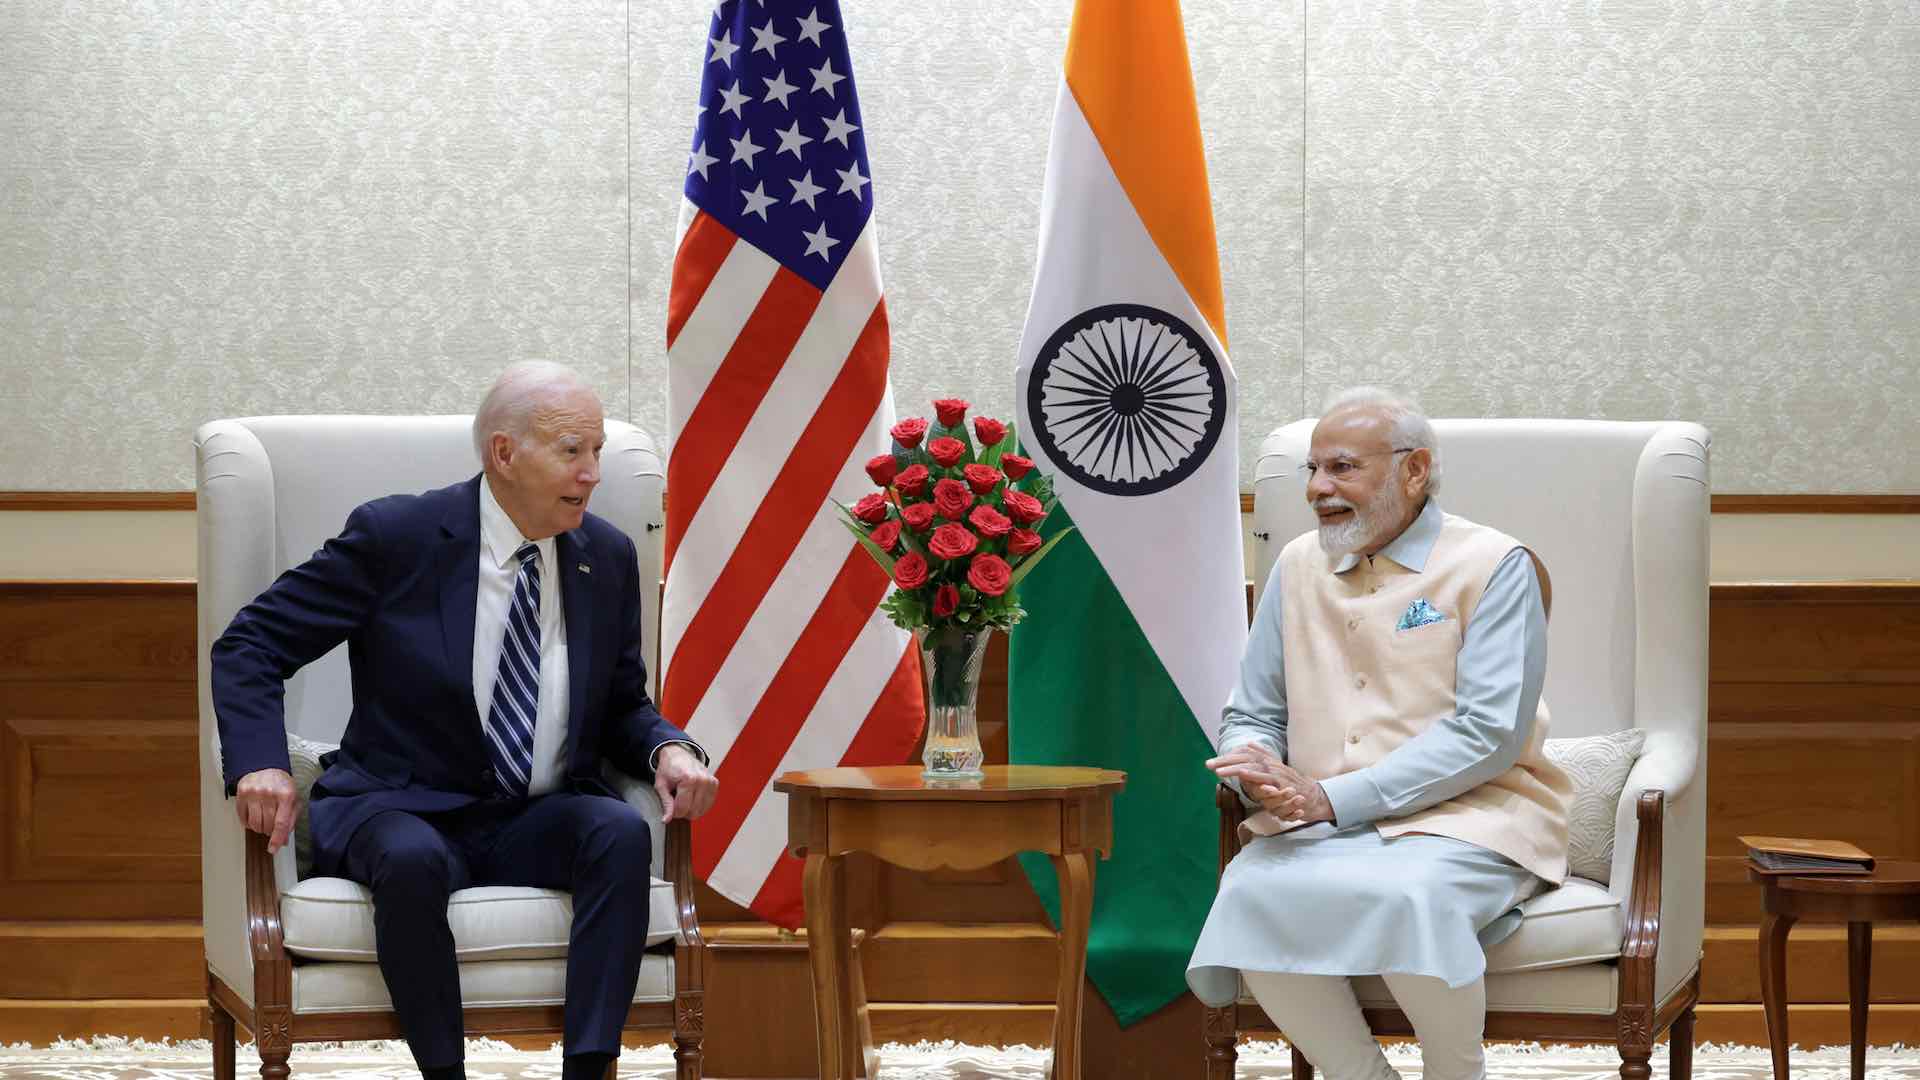 Biden and Modi Cement Ties as India Ascends Global Stage